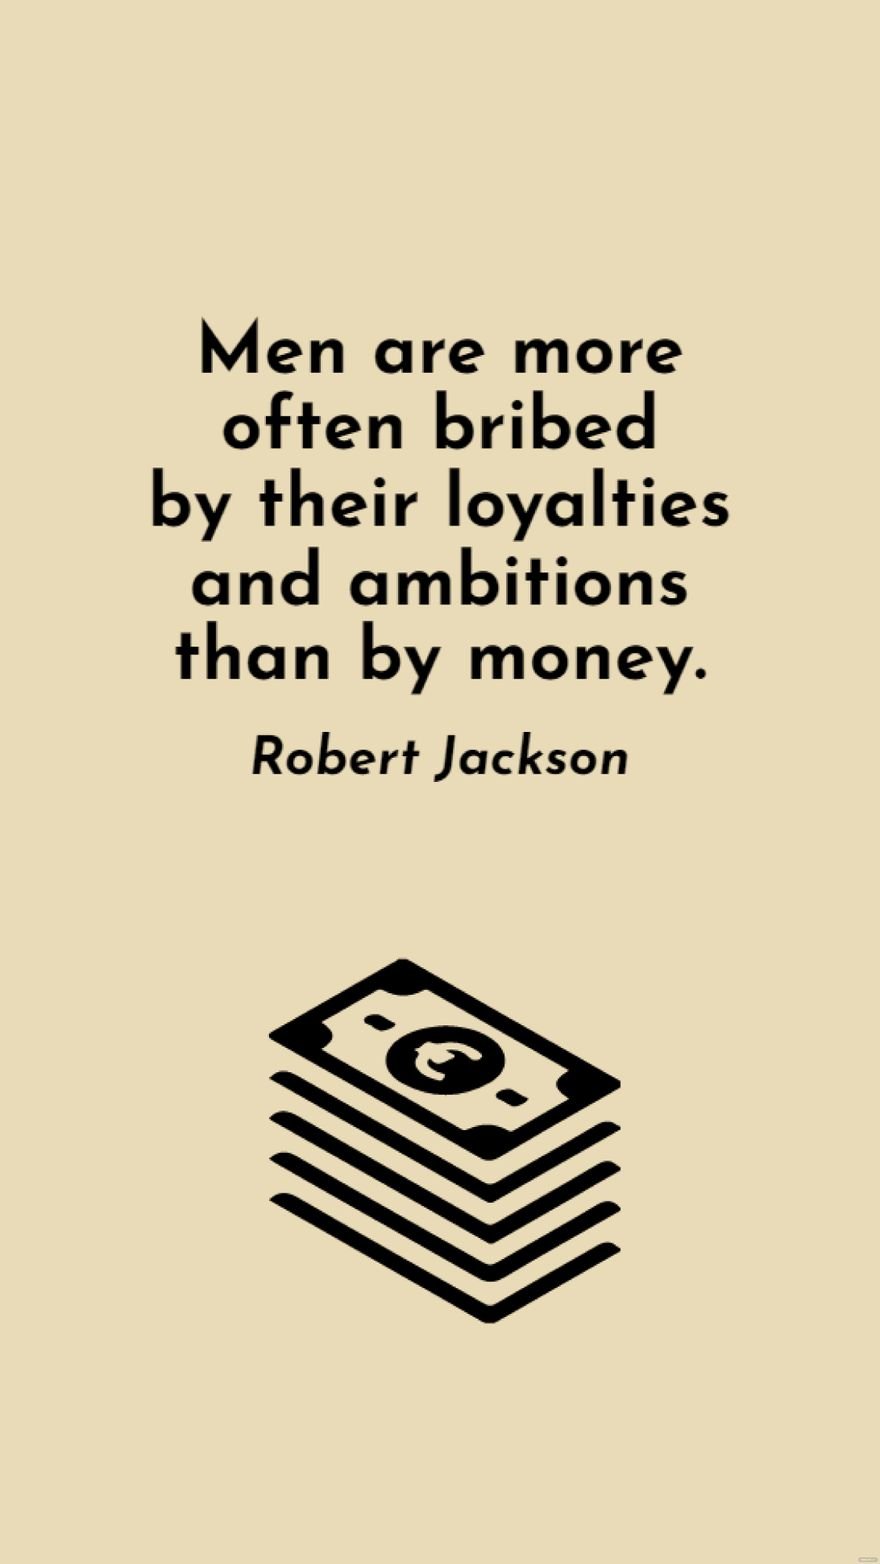 Robert Jackson - Men are more often bribed by their loyalties and ambitions than by money.